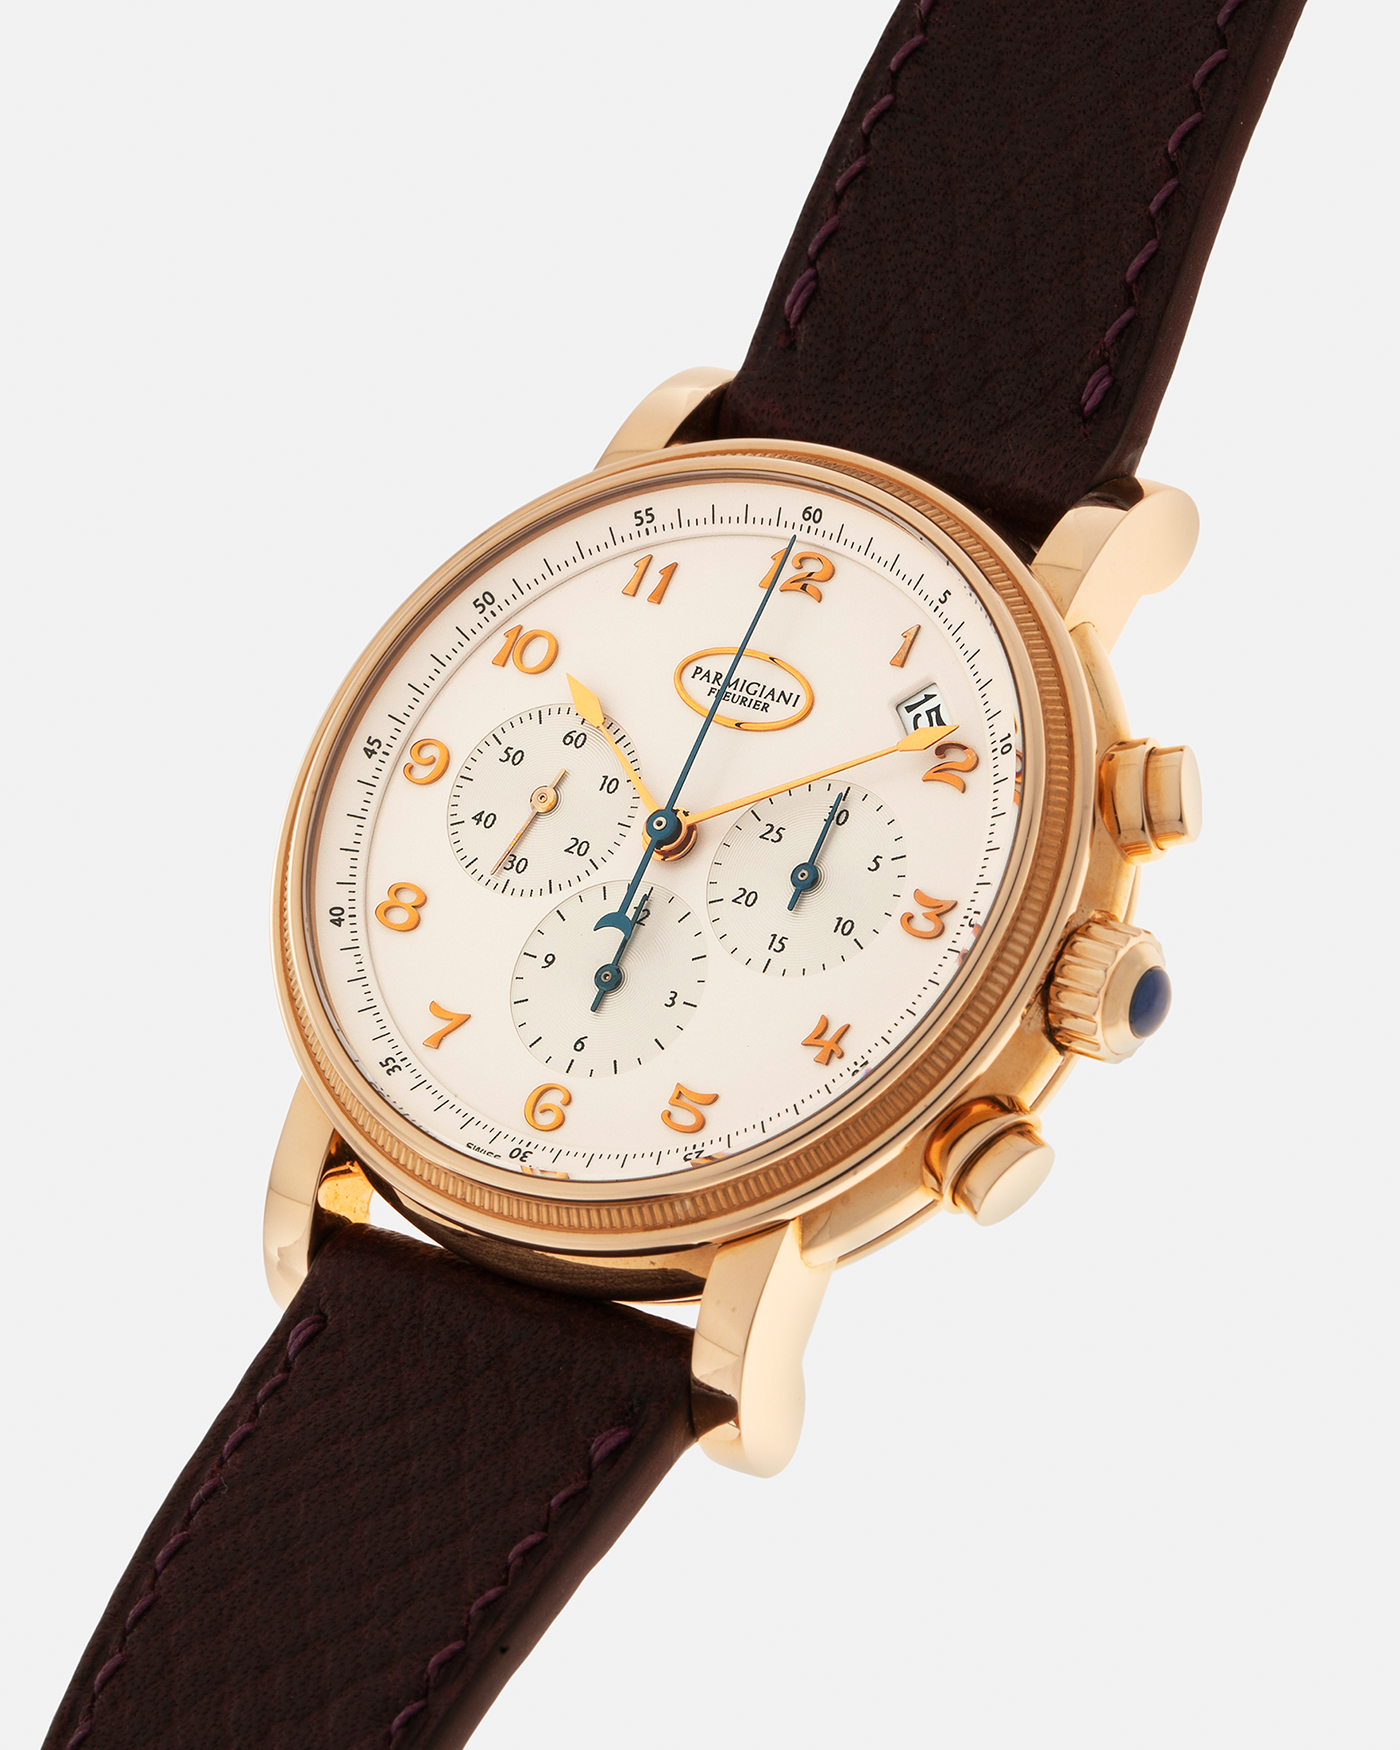 Brand: Parmigiani Fleurier Year: 2000s Model: Toric Chronograph Material: 18-carat Rose Gold Movement: Parmigiani Fleurier Cal. PF 190 (Based on the Zenith El Primero 400z), Self-Winding Case Diameter: 39.5mm Lug Width: 20mm Strap: Delugs Burgundy Textured Calf Leather with Signed 18-carat Rose Gold Tang Buckle